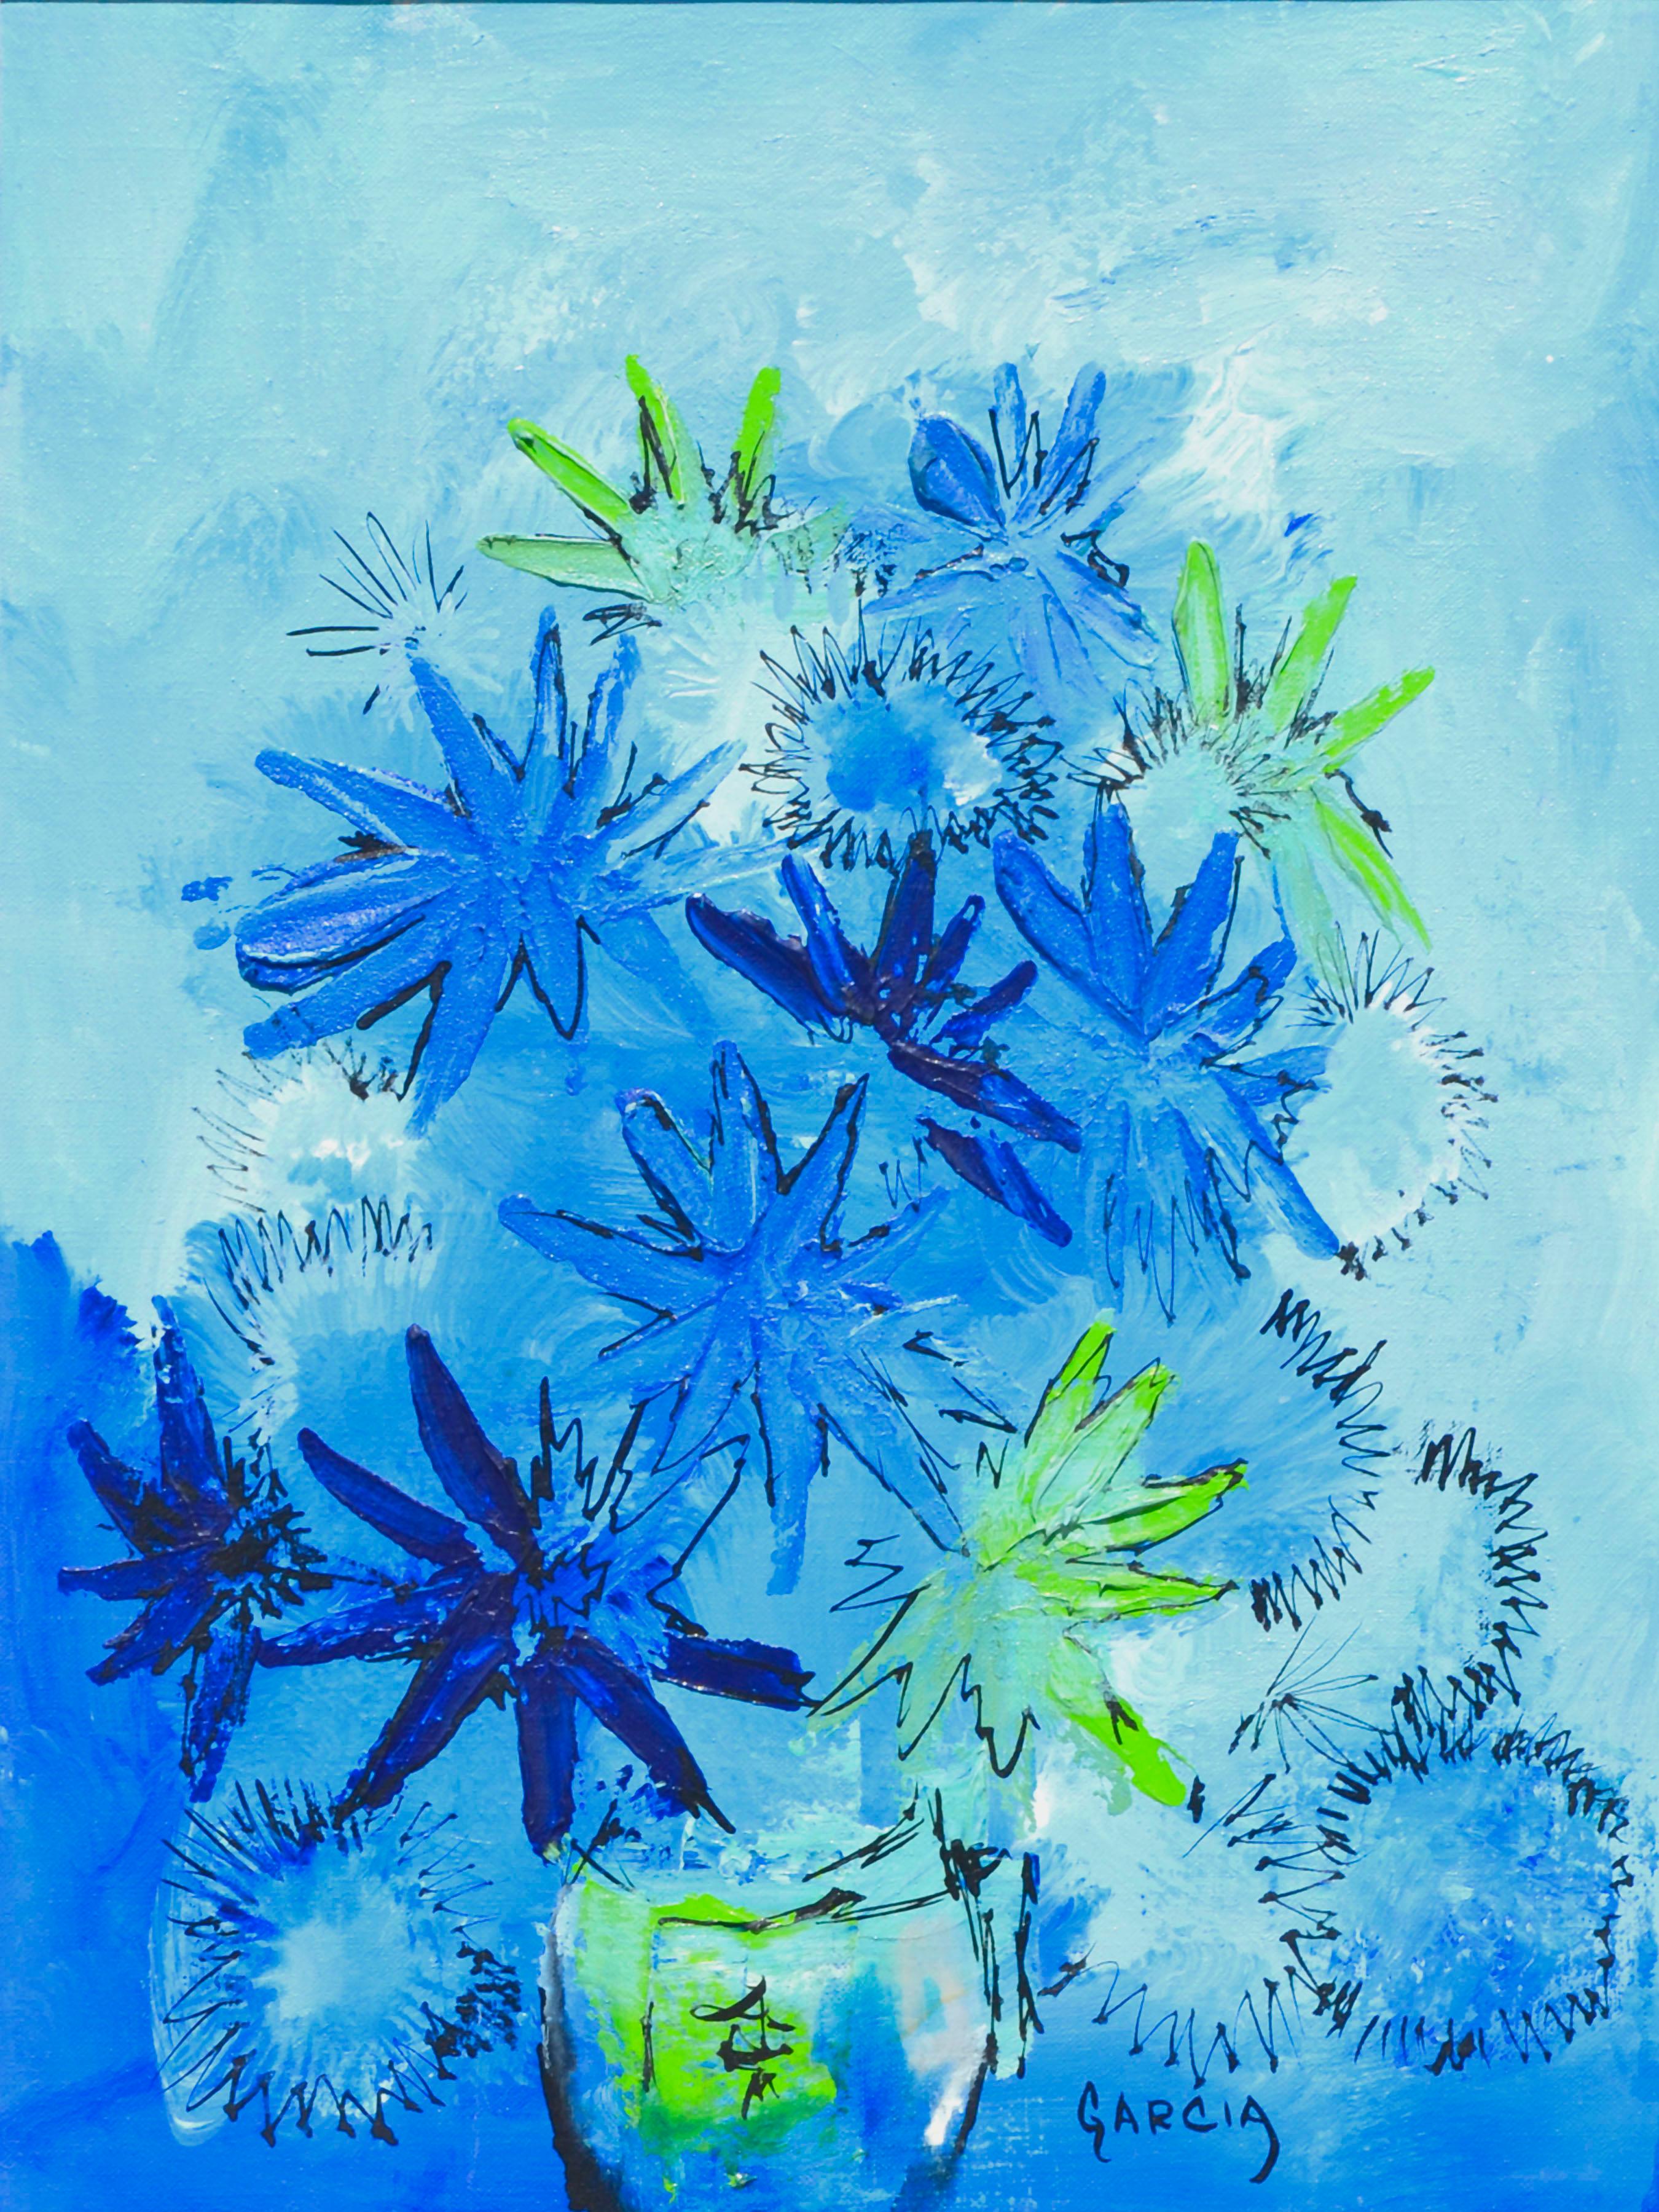 Blue & Green Mid-Century Floral - Painting by Daniel (Danny) Garcia